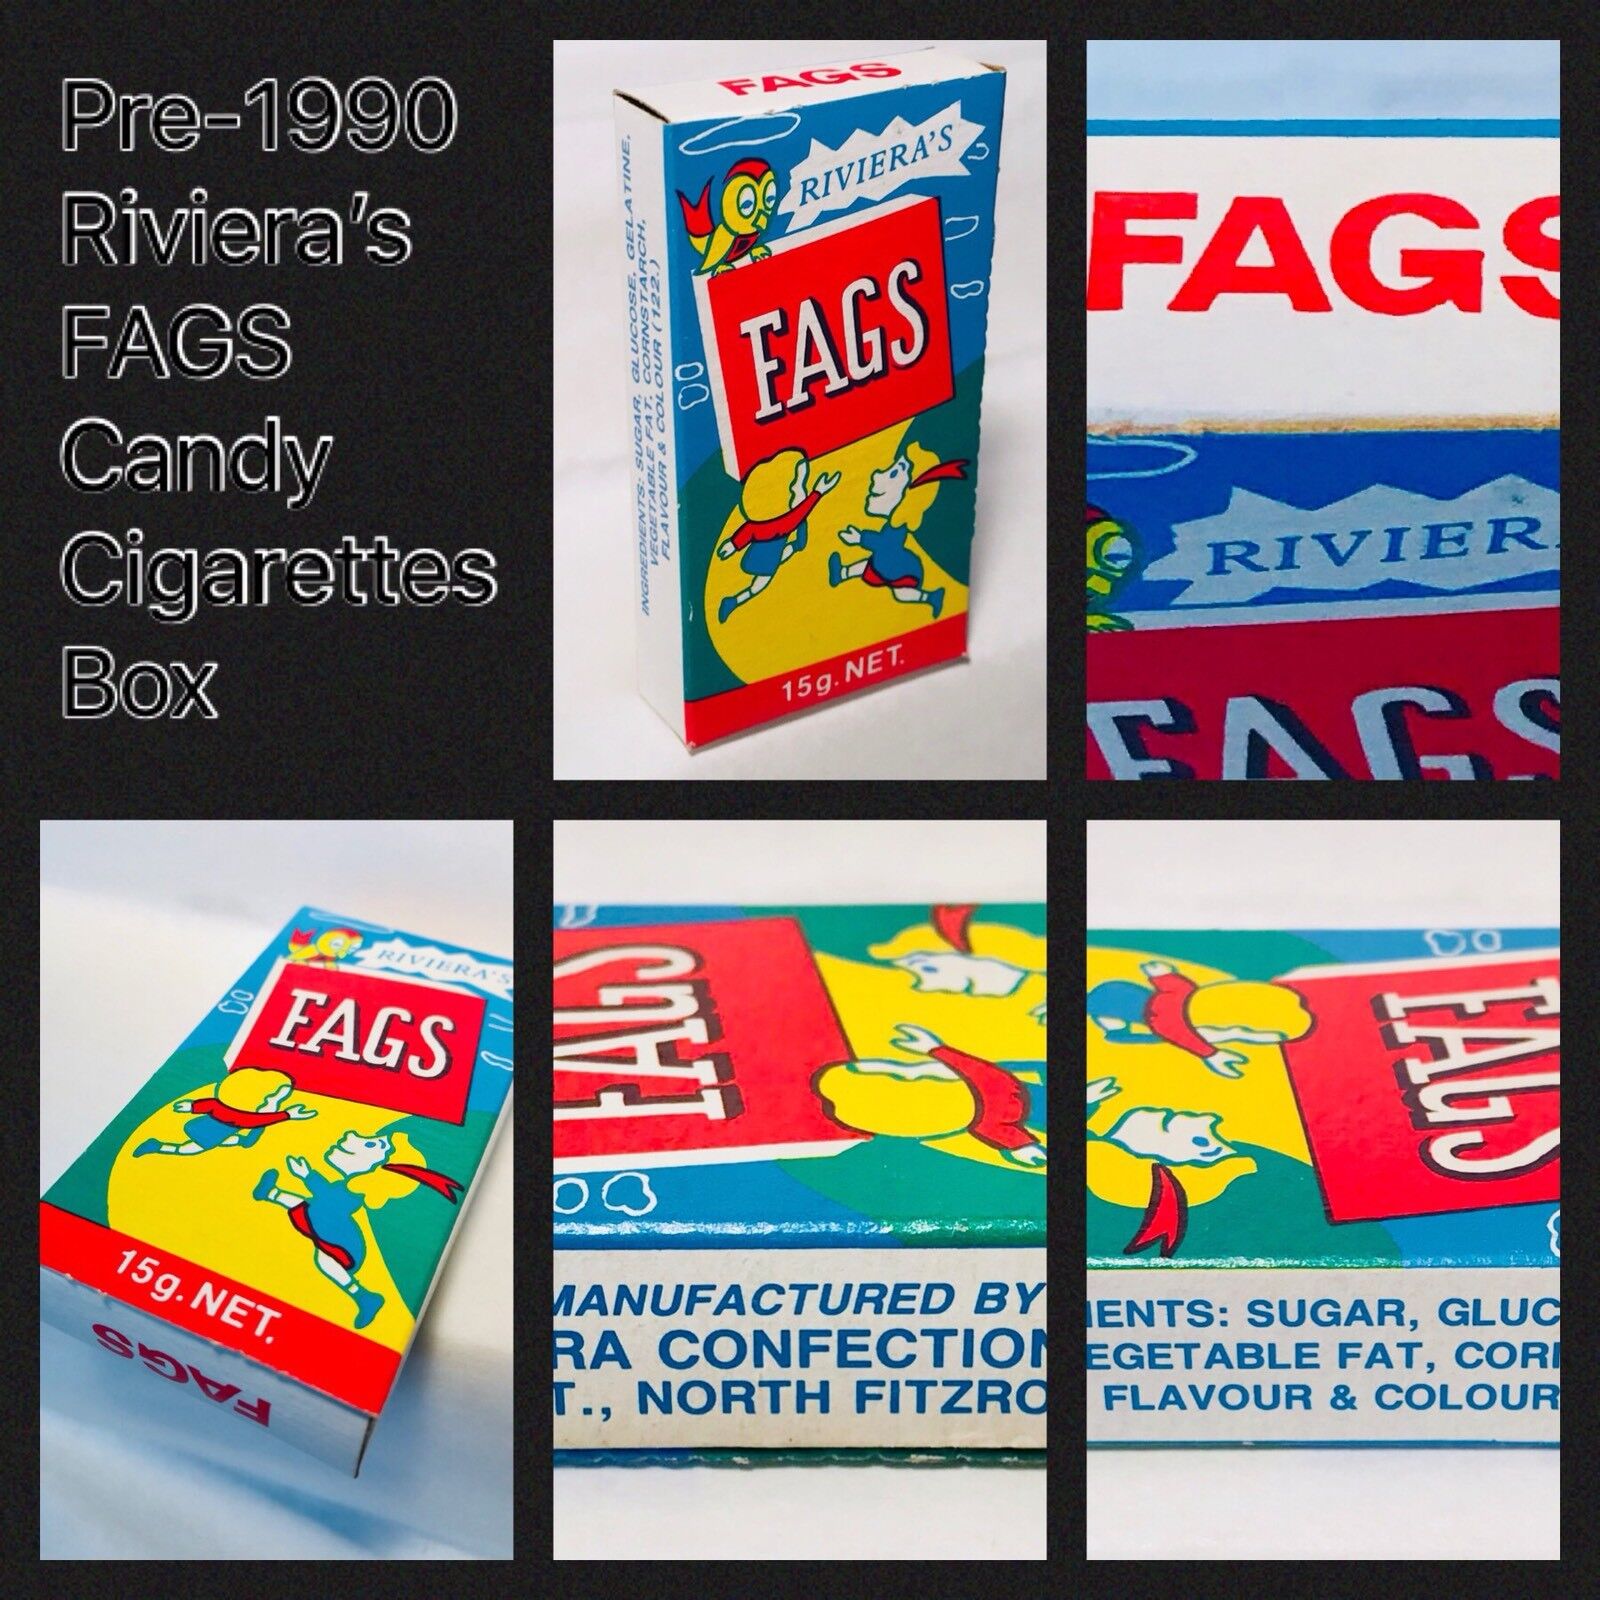 Vintage 1989 Riviera’s FAGS Candy Cigarettes Sticks Box container